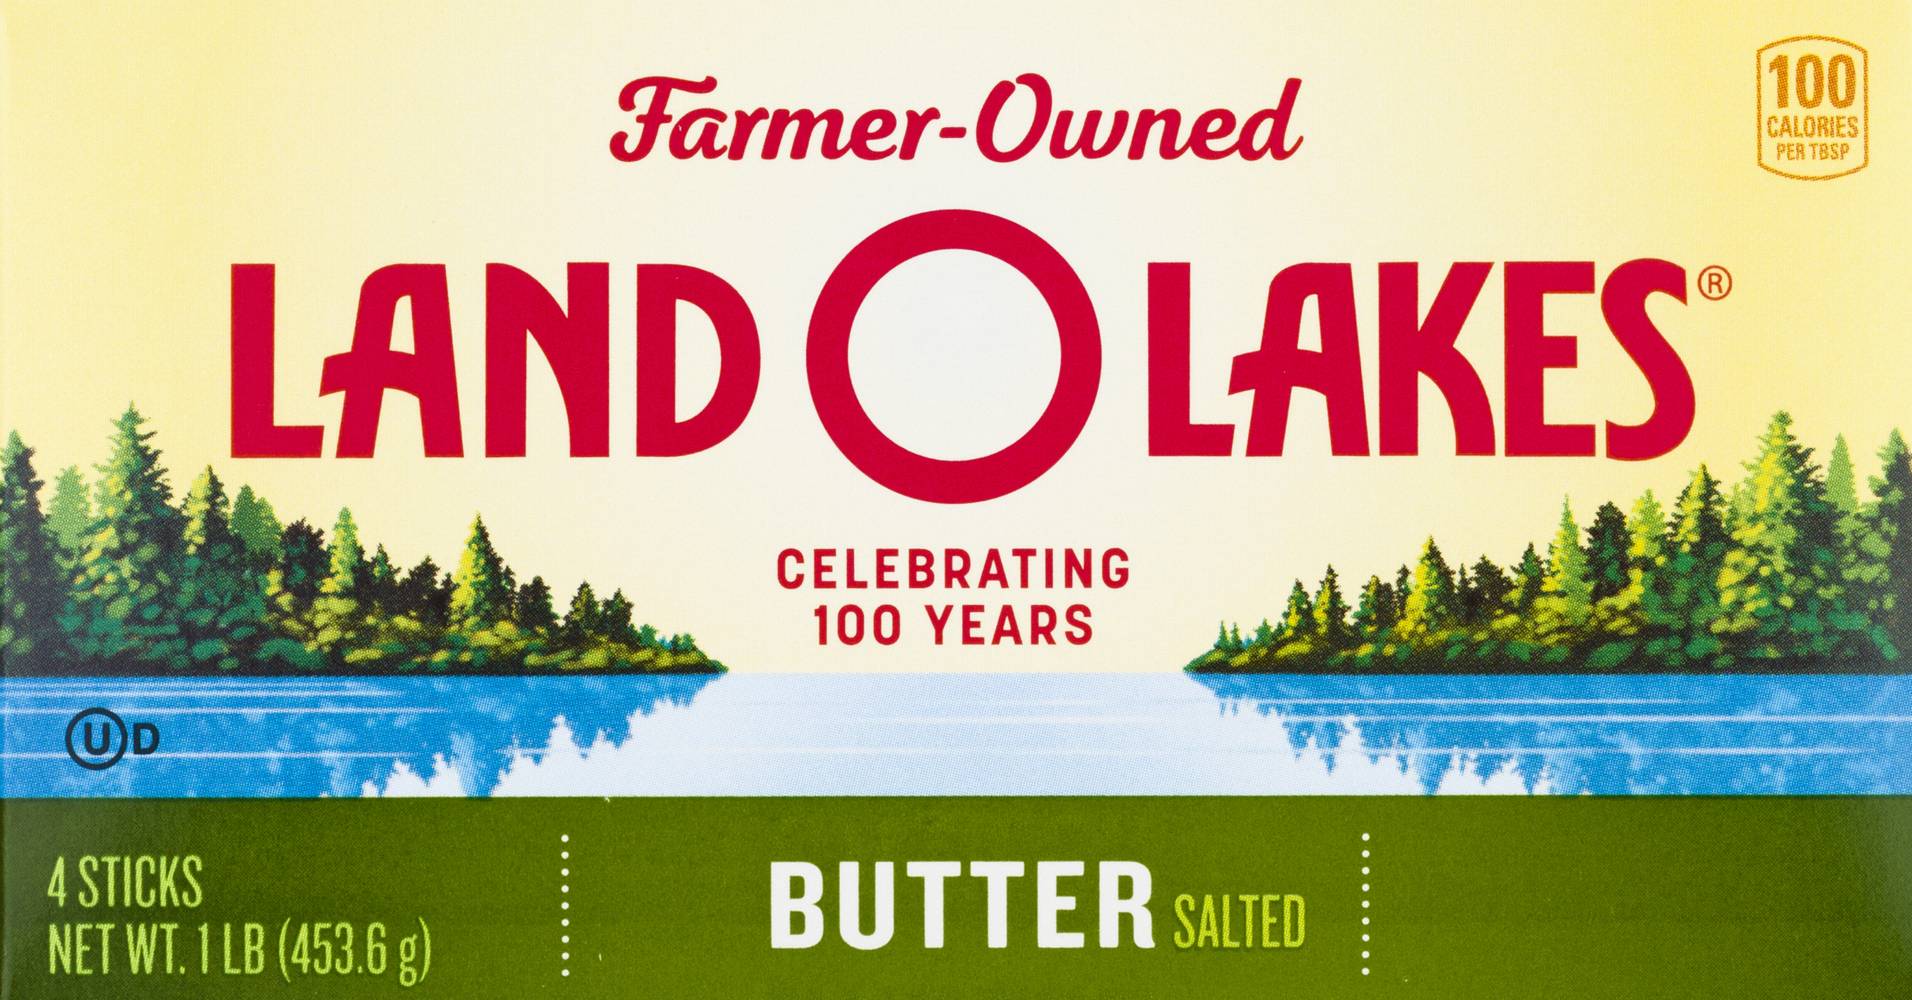 Land O'lakes Salted Butter Sticks (4 ct)